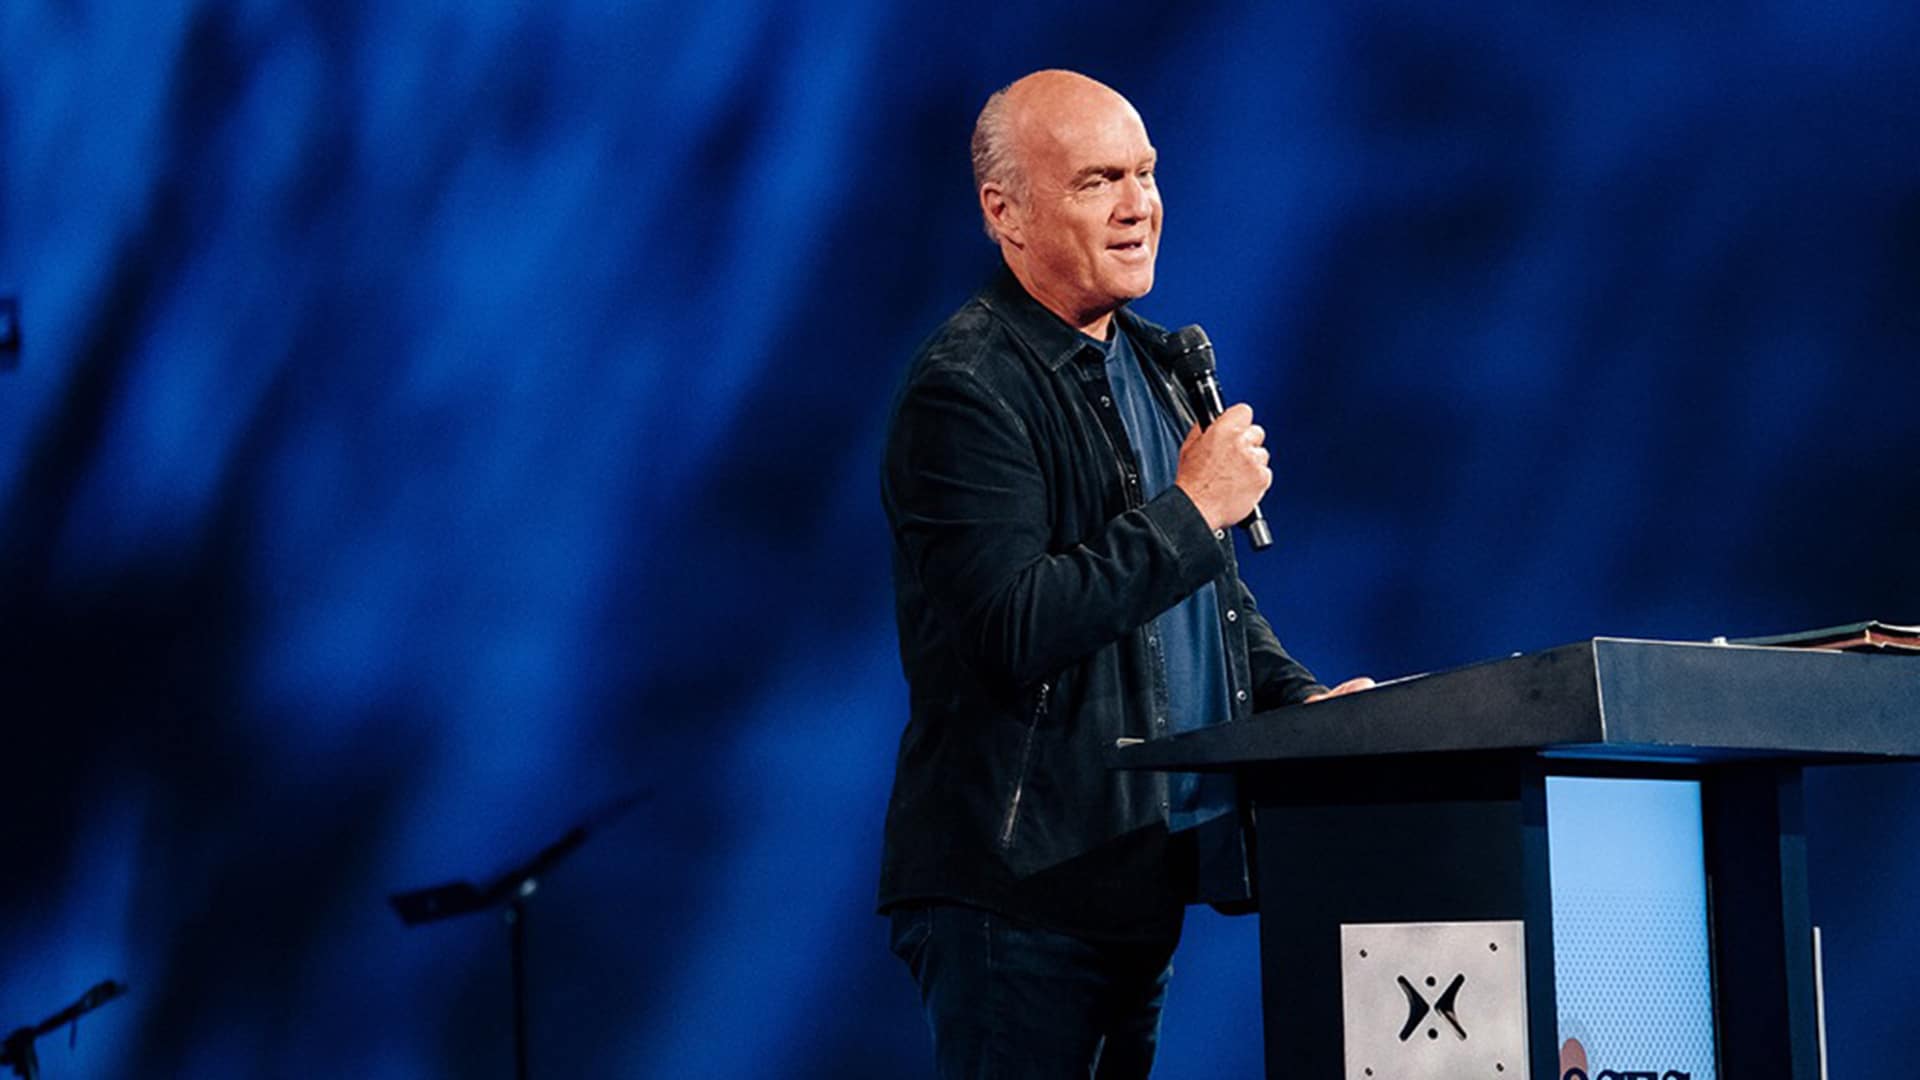 In this webcast, Pastor Greg Laurie shares a message from Hebrews 11 titled “Your Life Has a Purpose!” in our “Sunday Morning" series at Harvest Christian Fellowship.